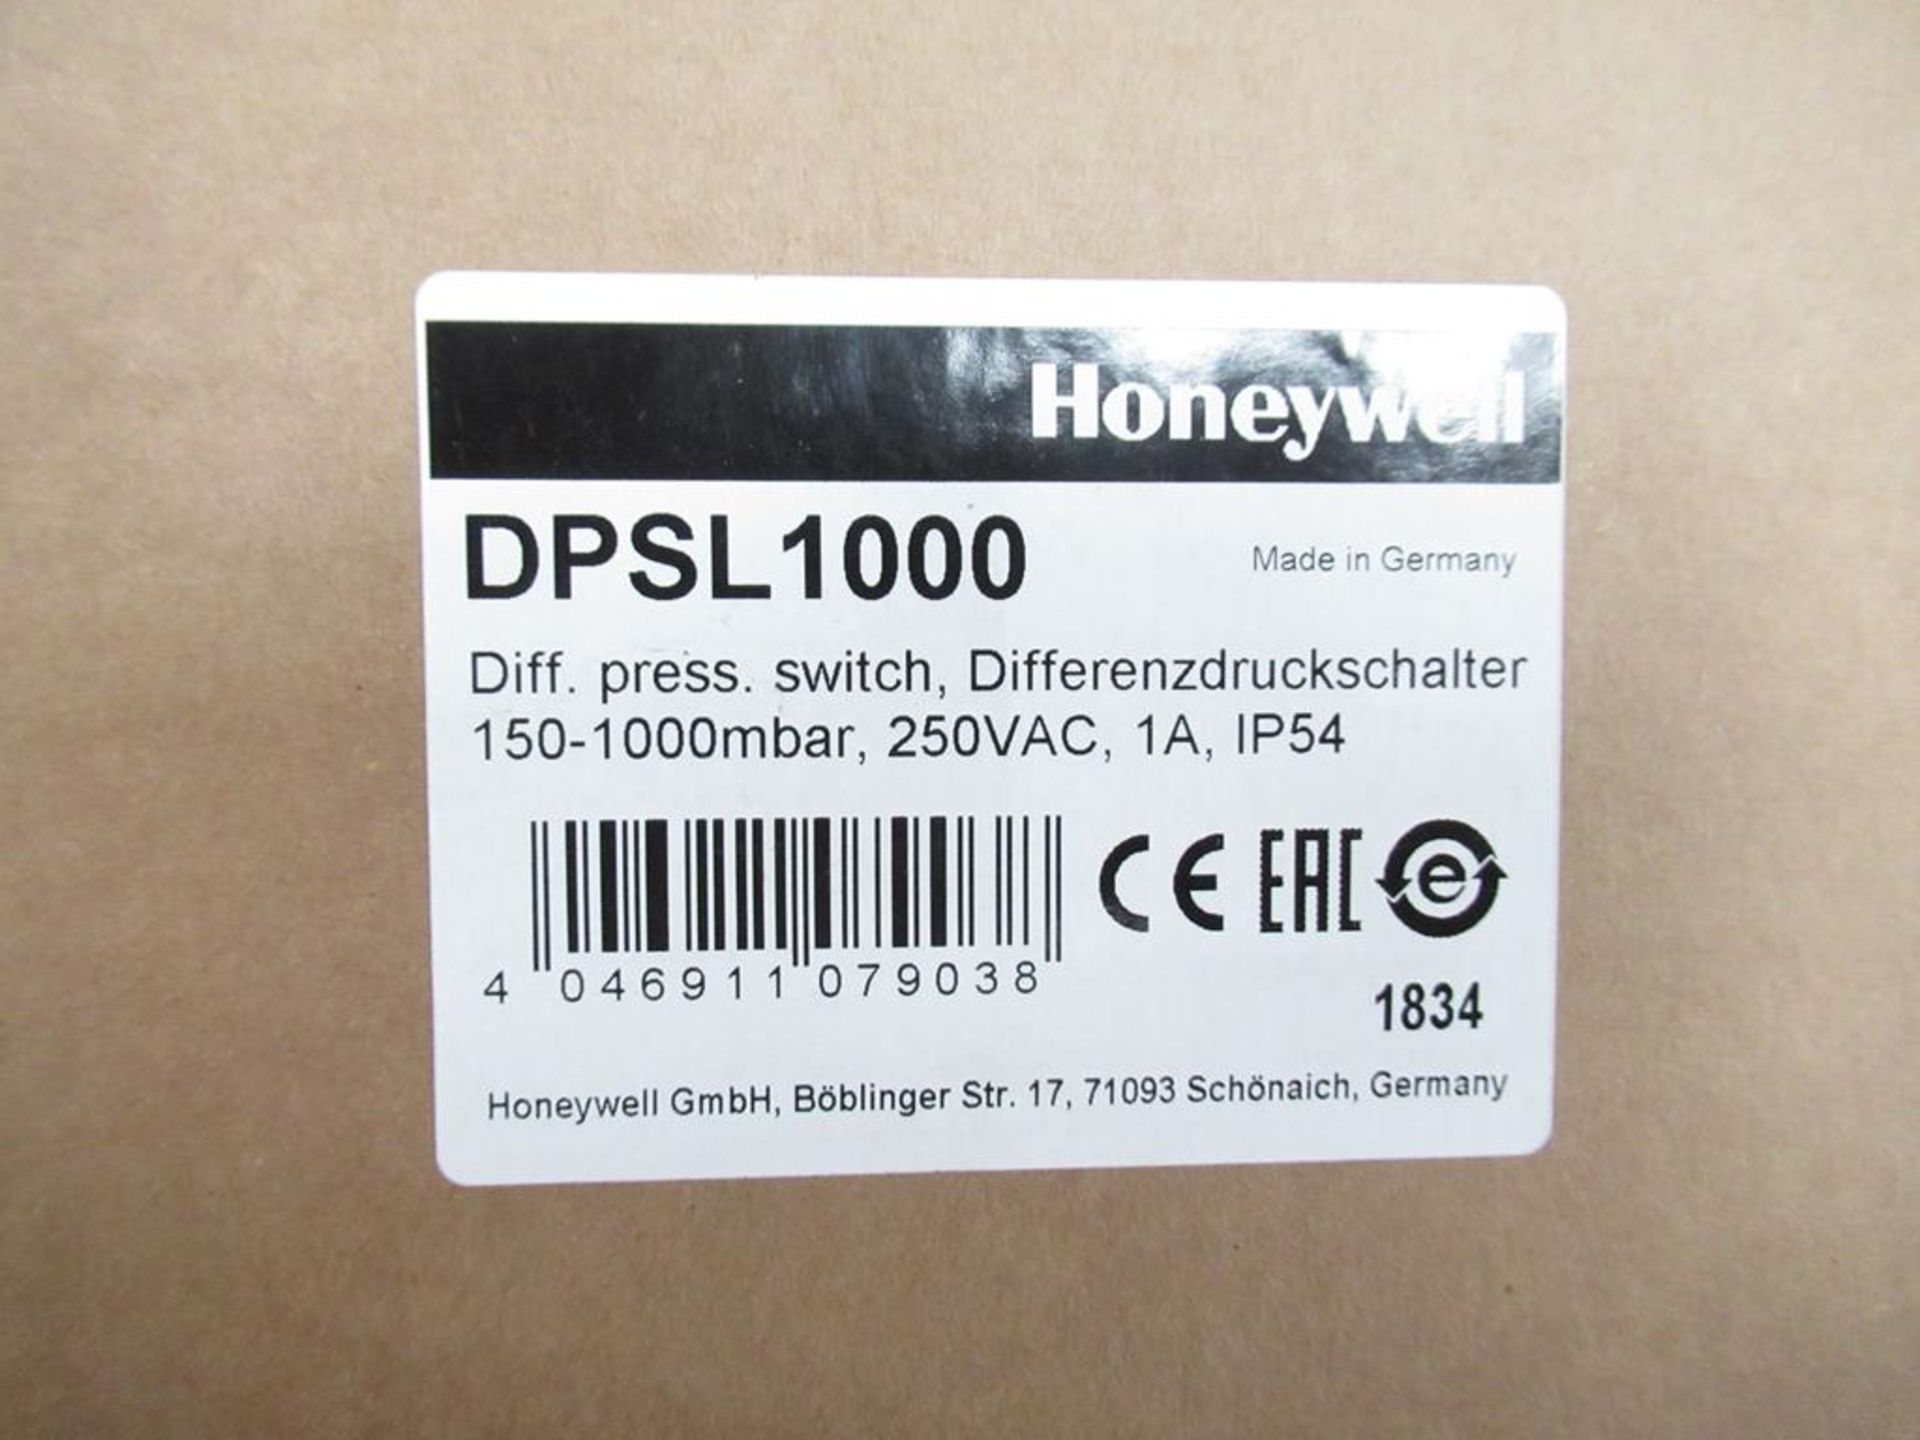 2 x Honeywell DPSL 1000 Differential Pressure Switches - Image 2 of 4